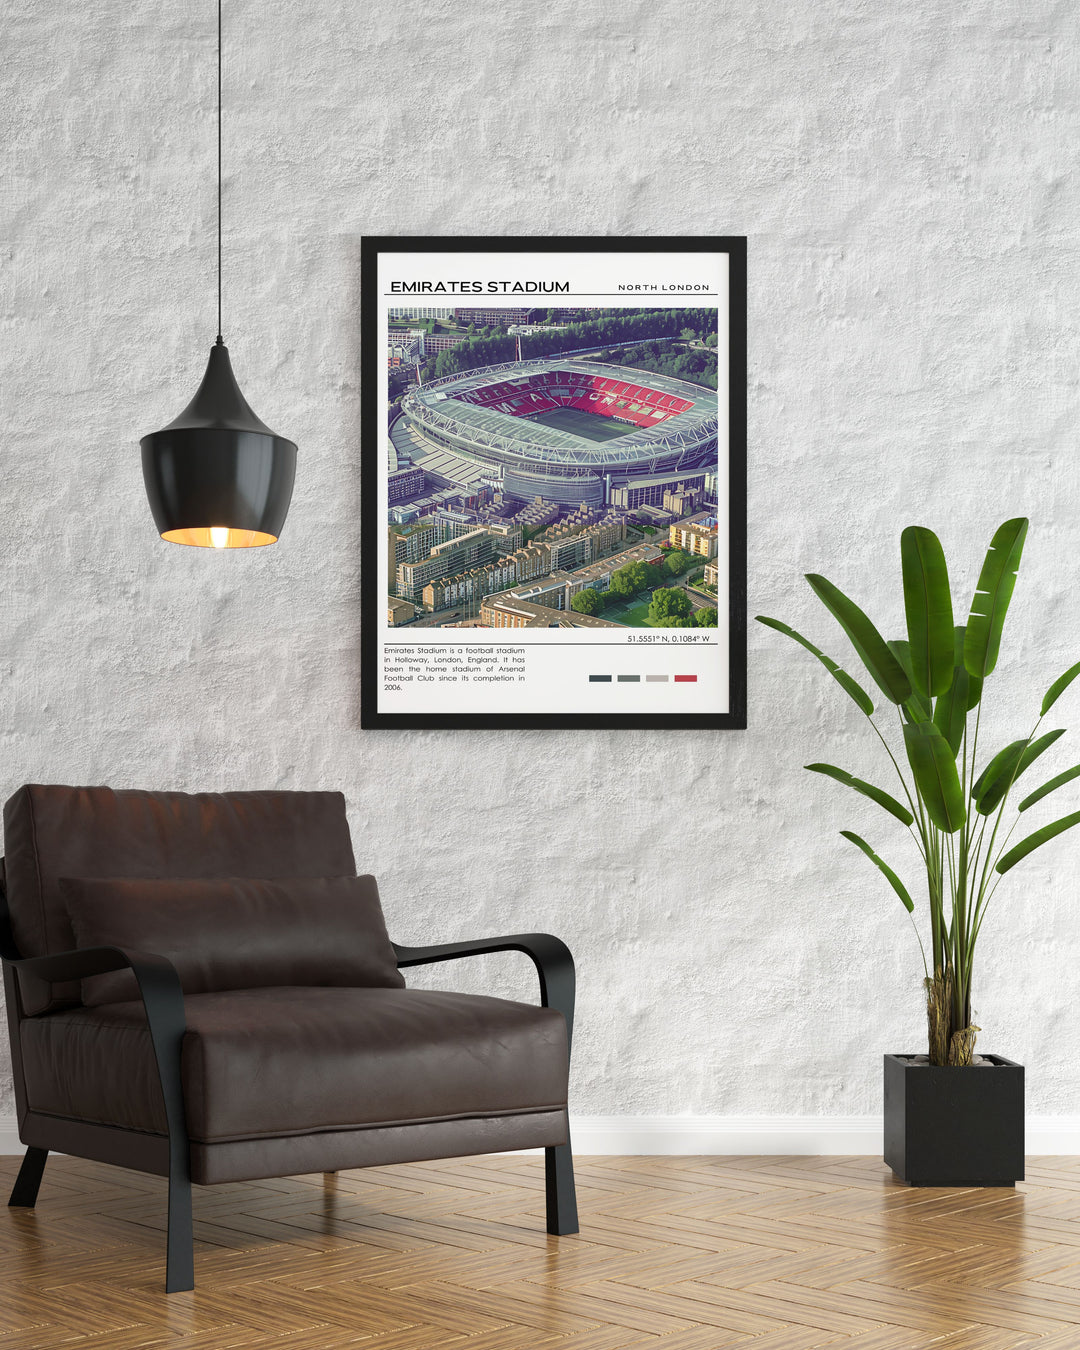 Travel art showcasing the impressive Emirates Stadium, highlighting its role as a top destination for football enthusiasts.